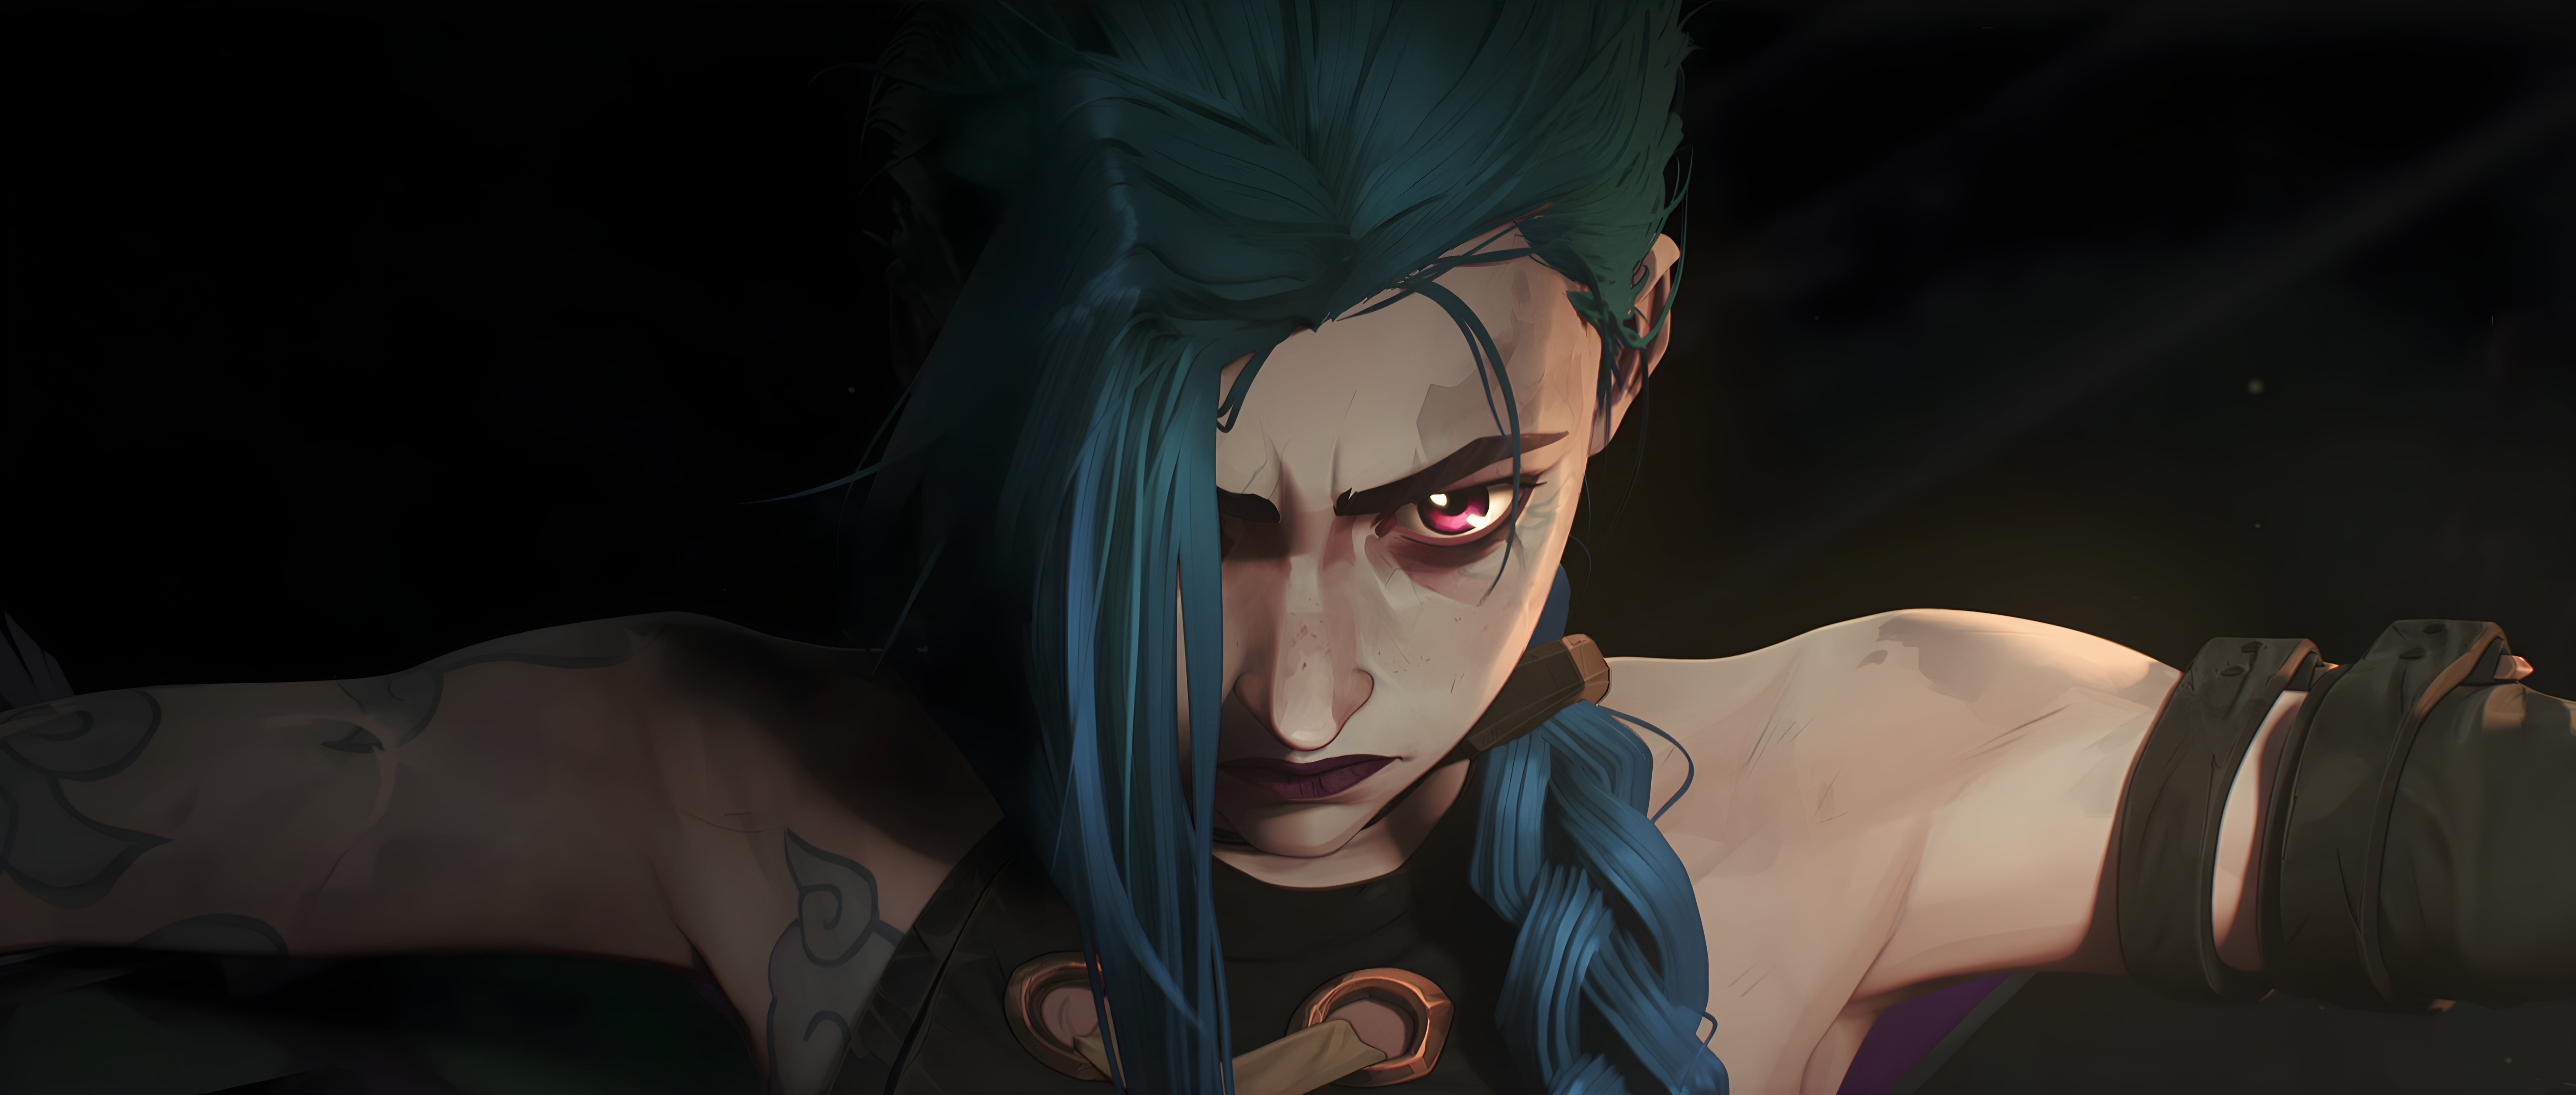 Jinx (League of Legends), Arcane, TV series, video game characters